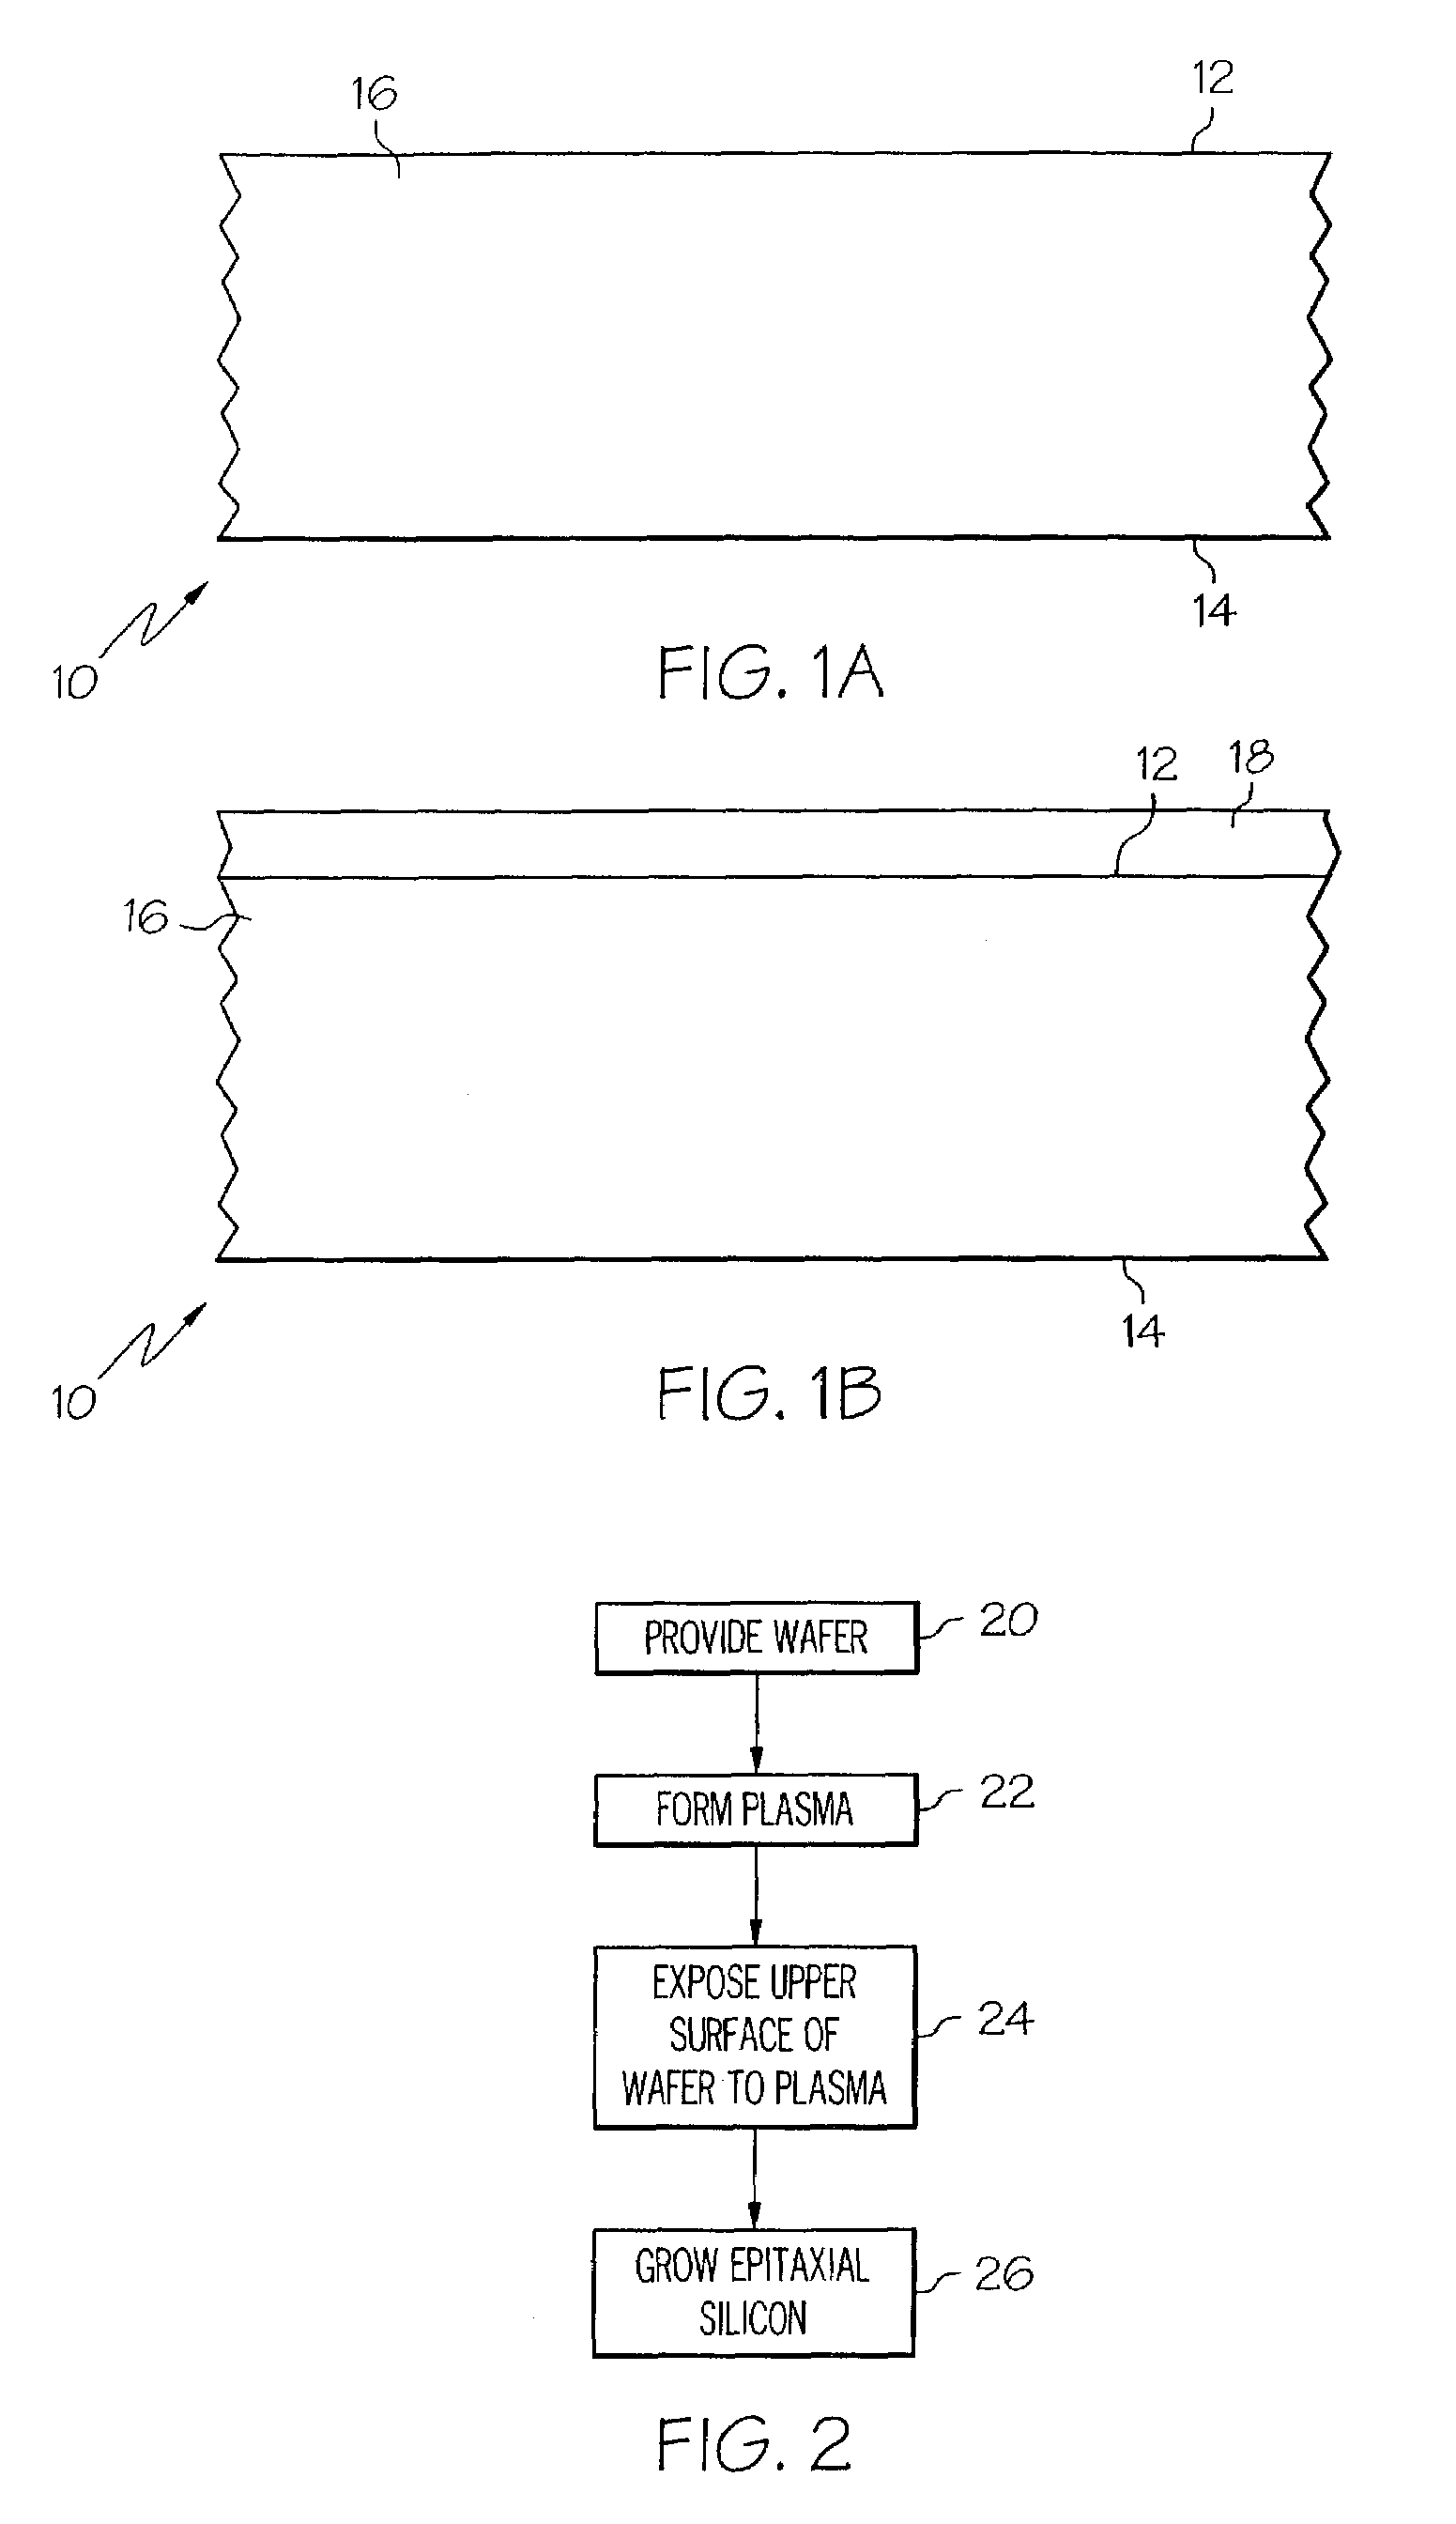 Methods for epitaxial silicon growth